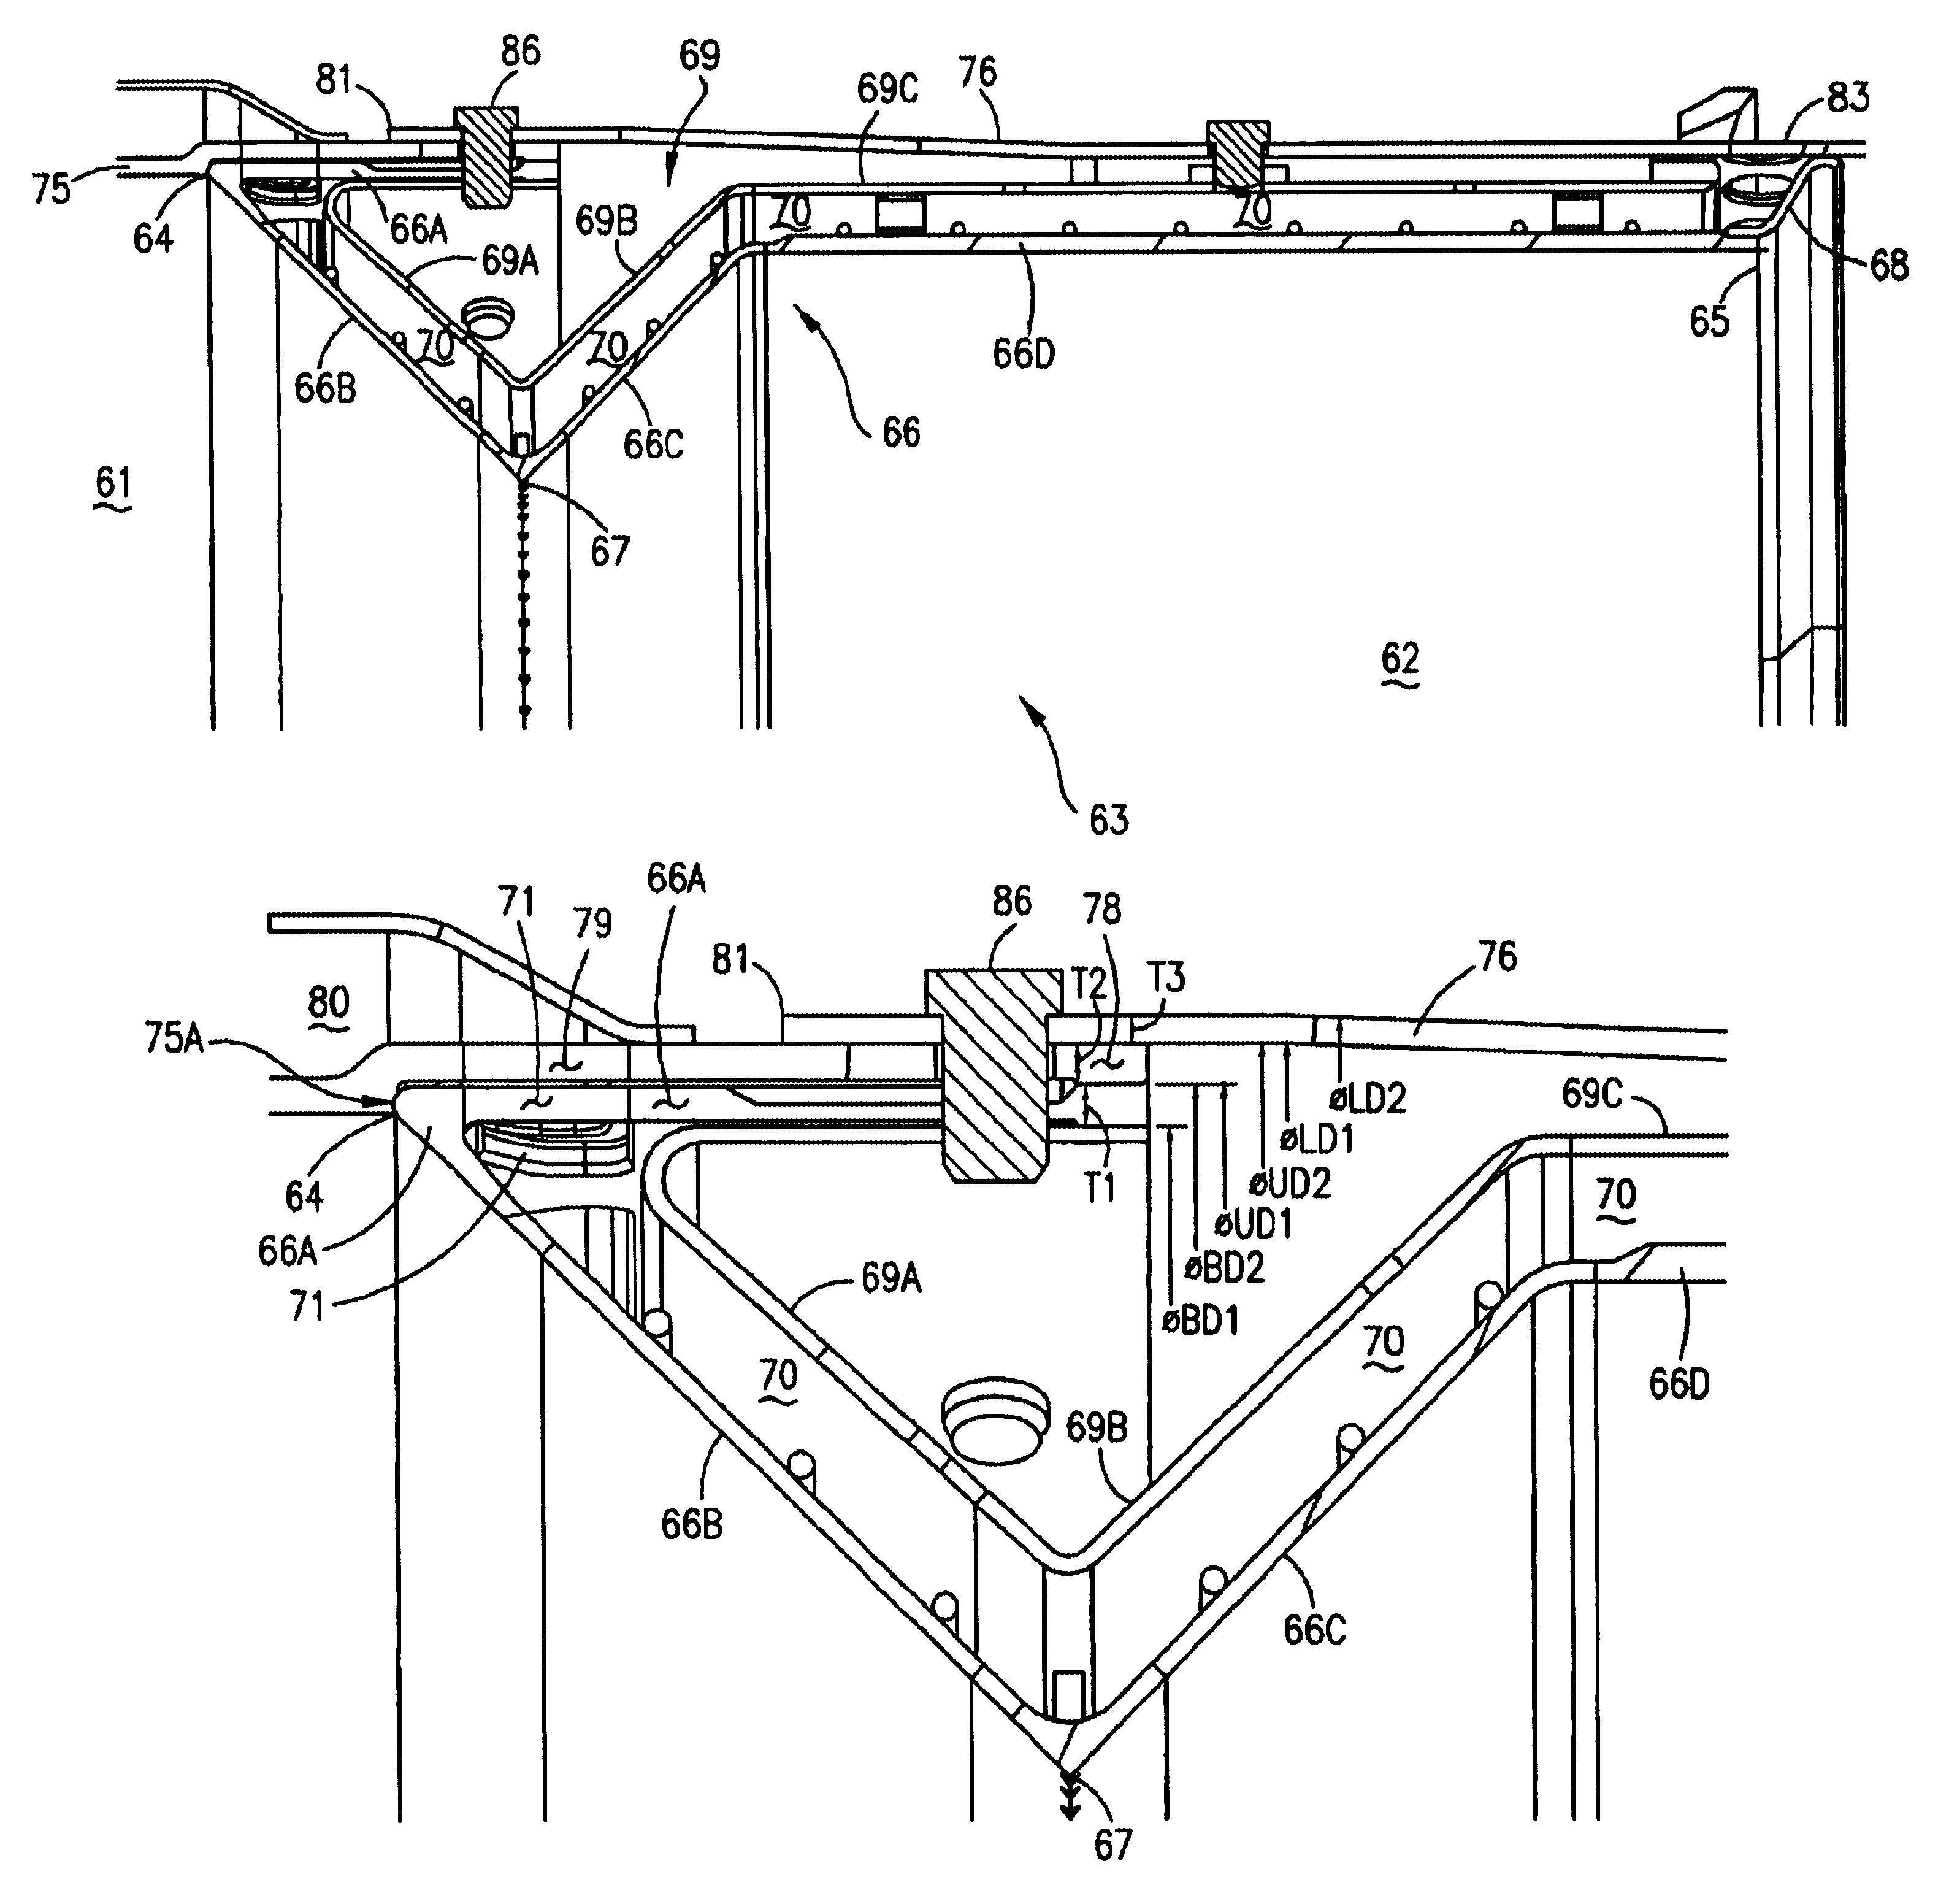 Combustion chamber/venturi configuration and assembly method